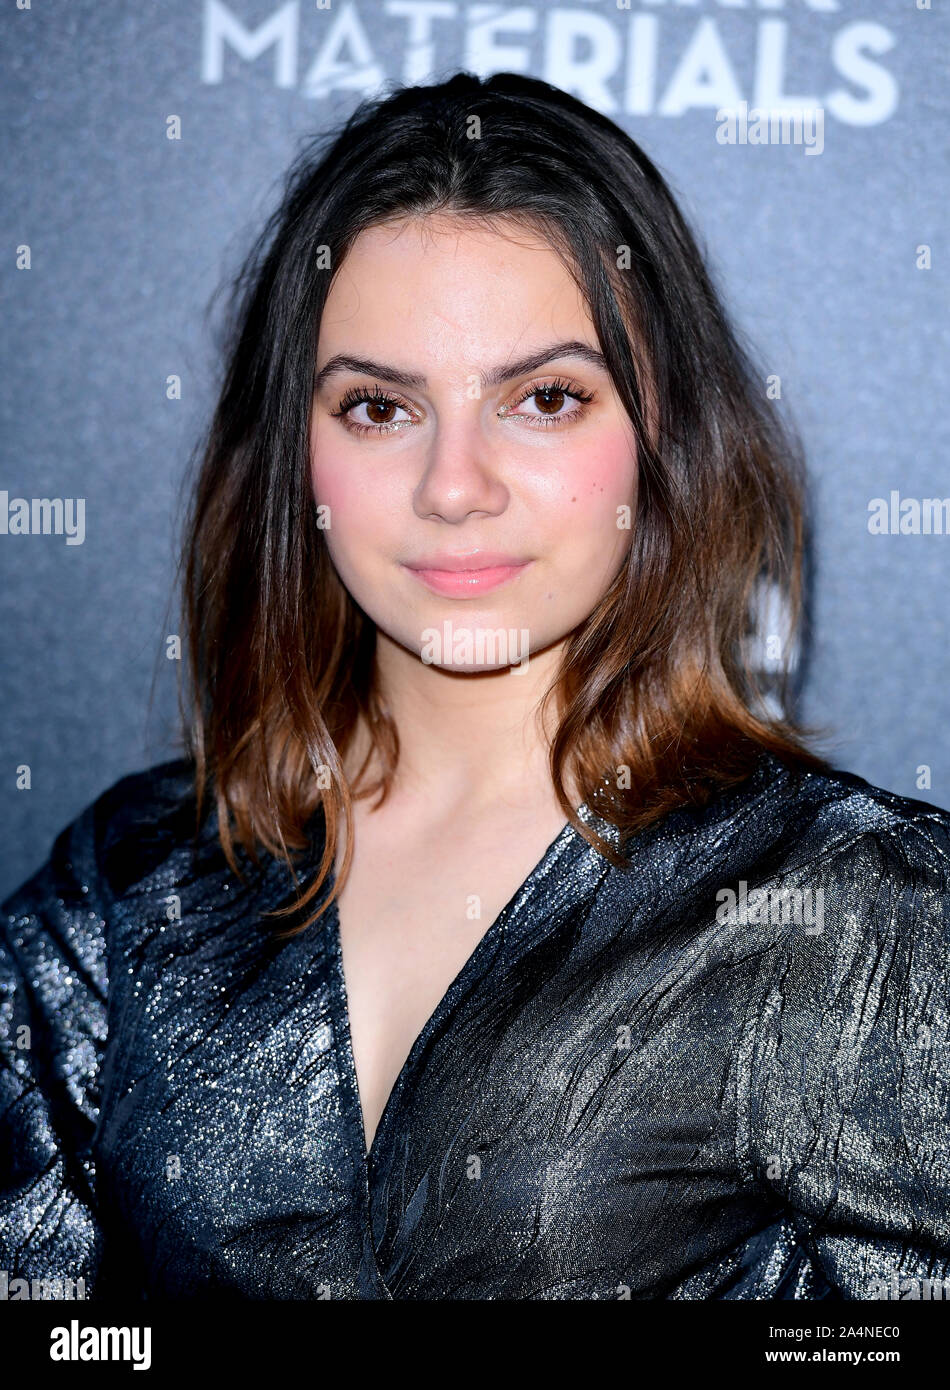 Dafne Keen attending the premiere of His Dark Materials held at the BFI Southbank, London. Stock Photo